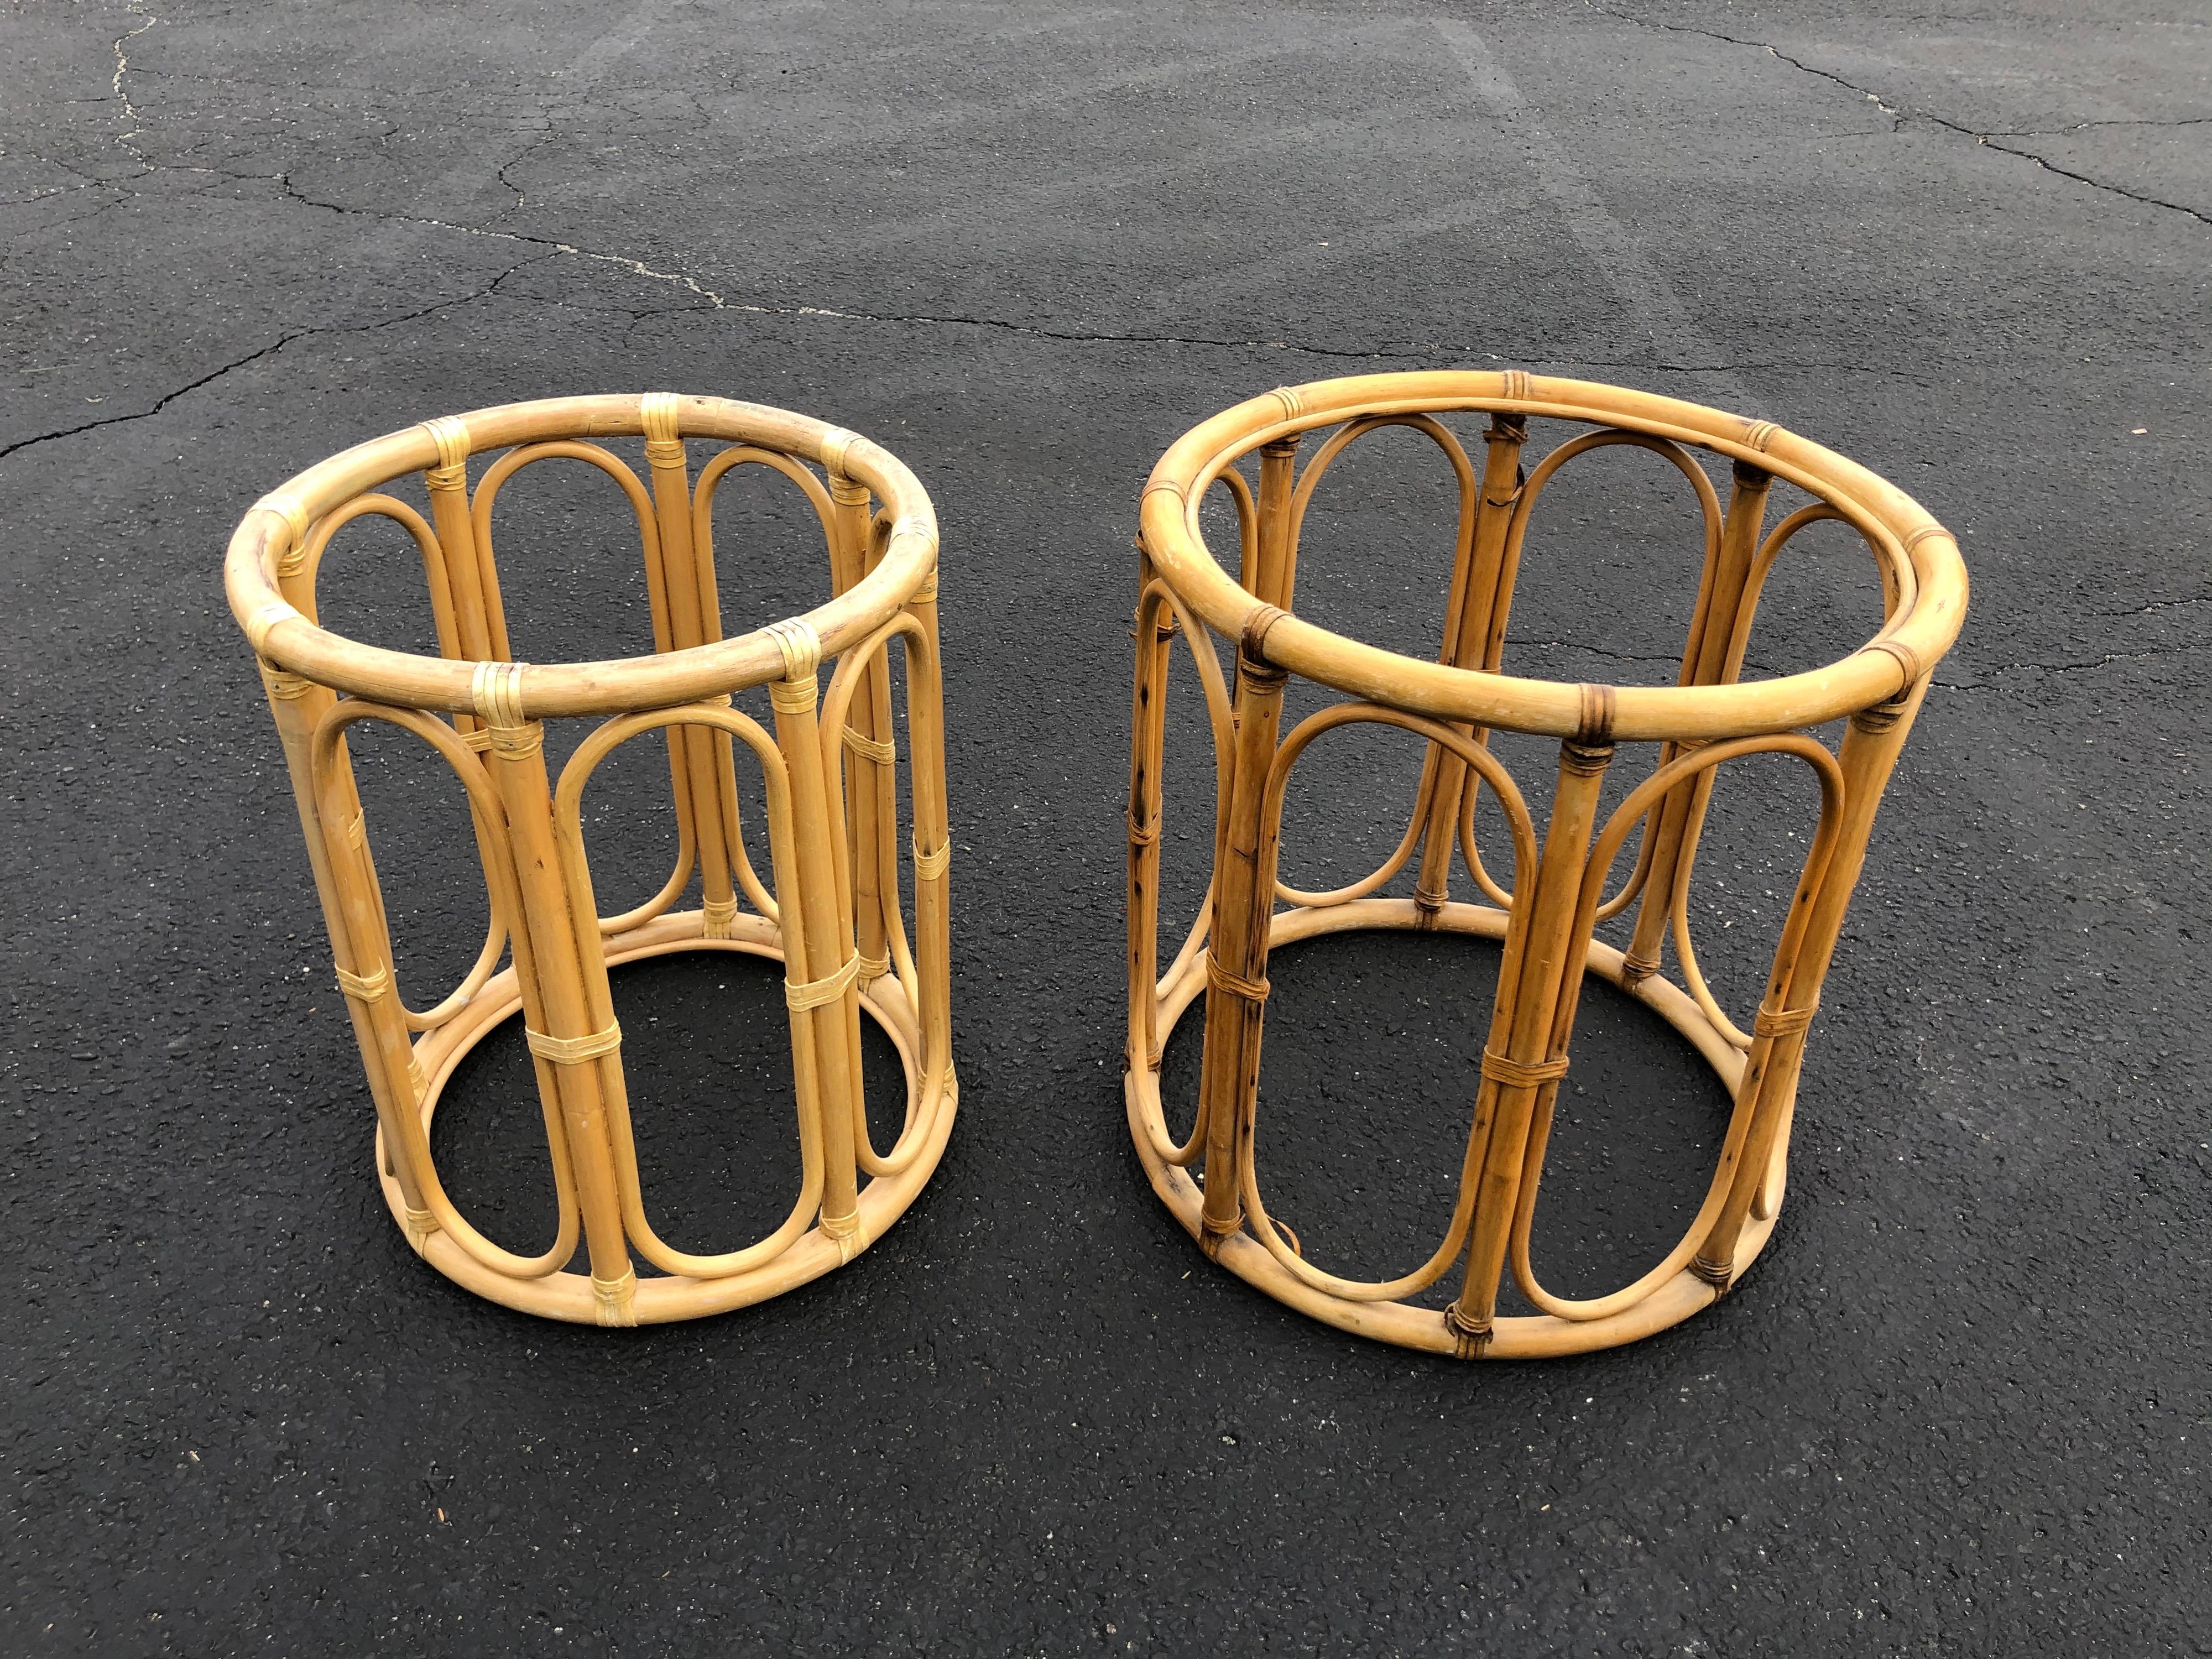 Pair of Boho Chic round rattan tables bases. Just add glass tops. One is large enough to be a dining table base and the other a side table base. Tropical McGuire style tables perfect for that coastal home. These bases can be parcel  shipped for $45